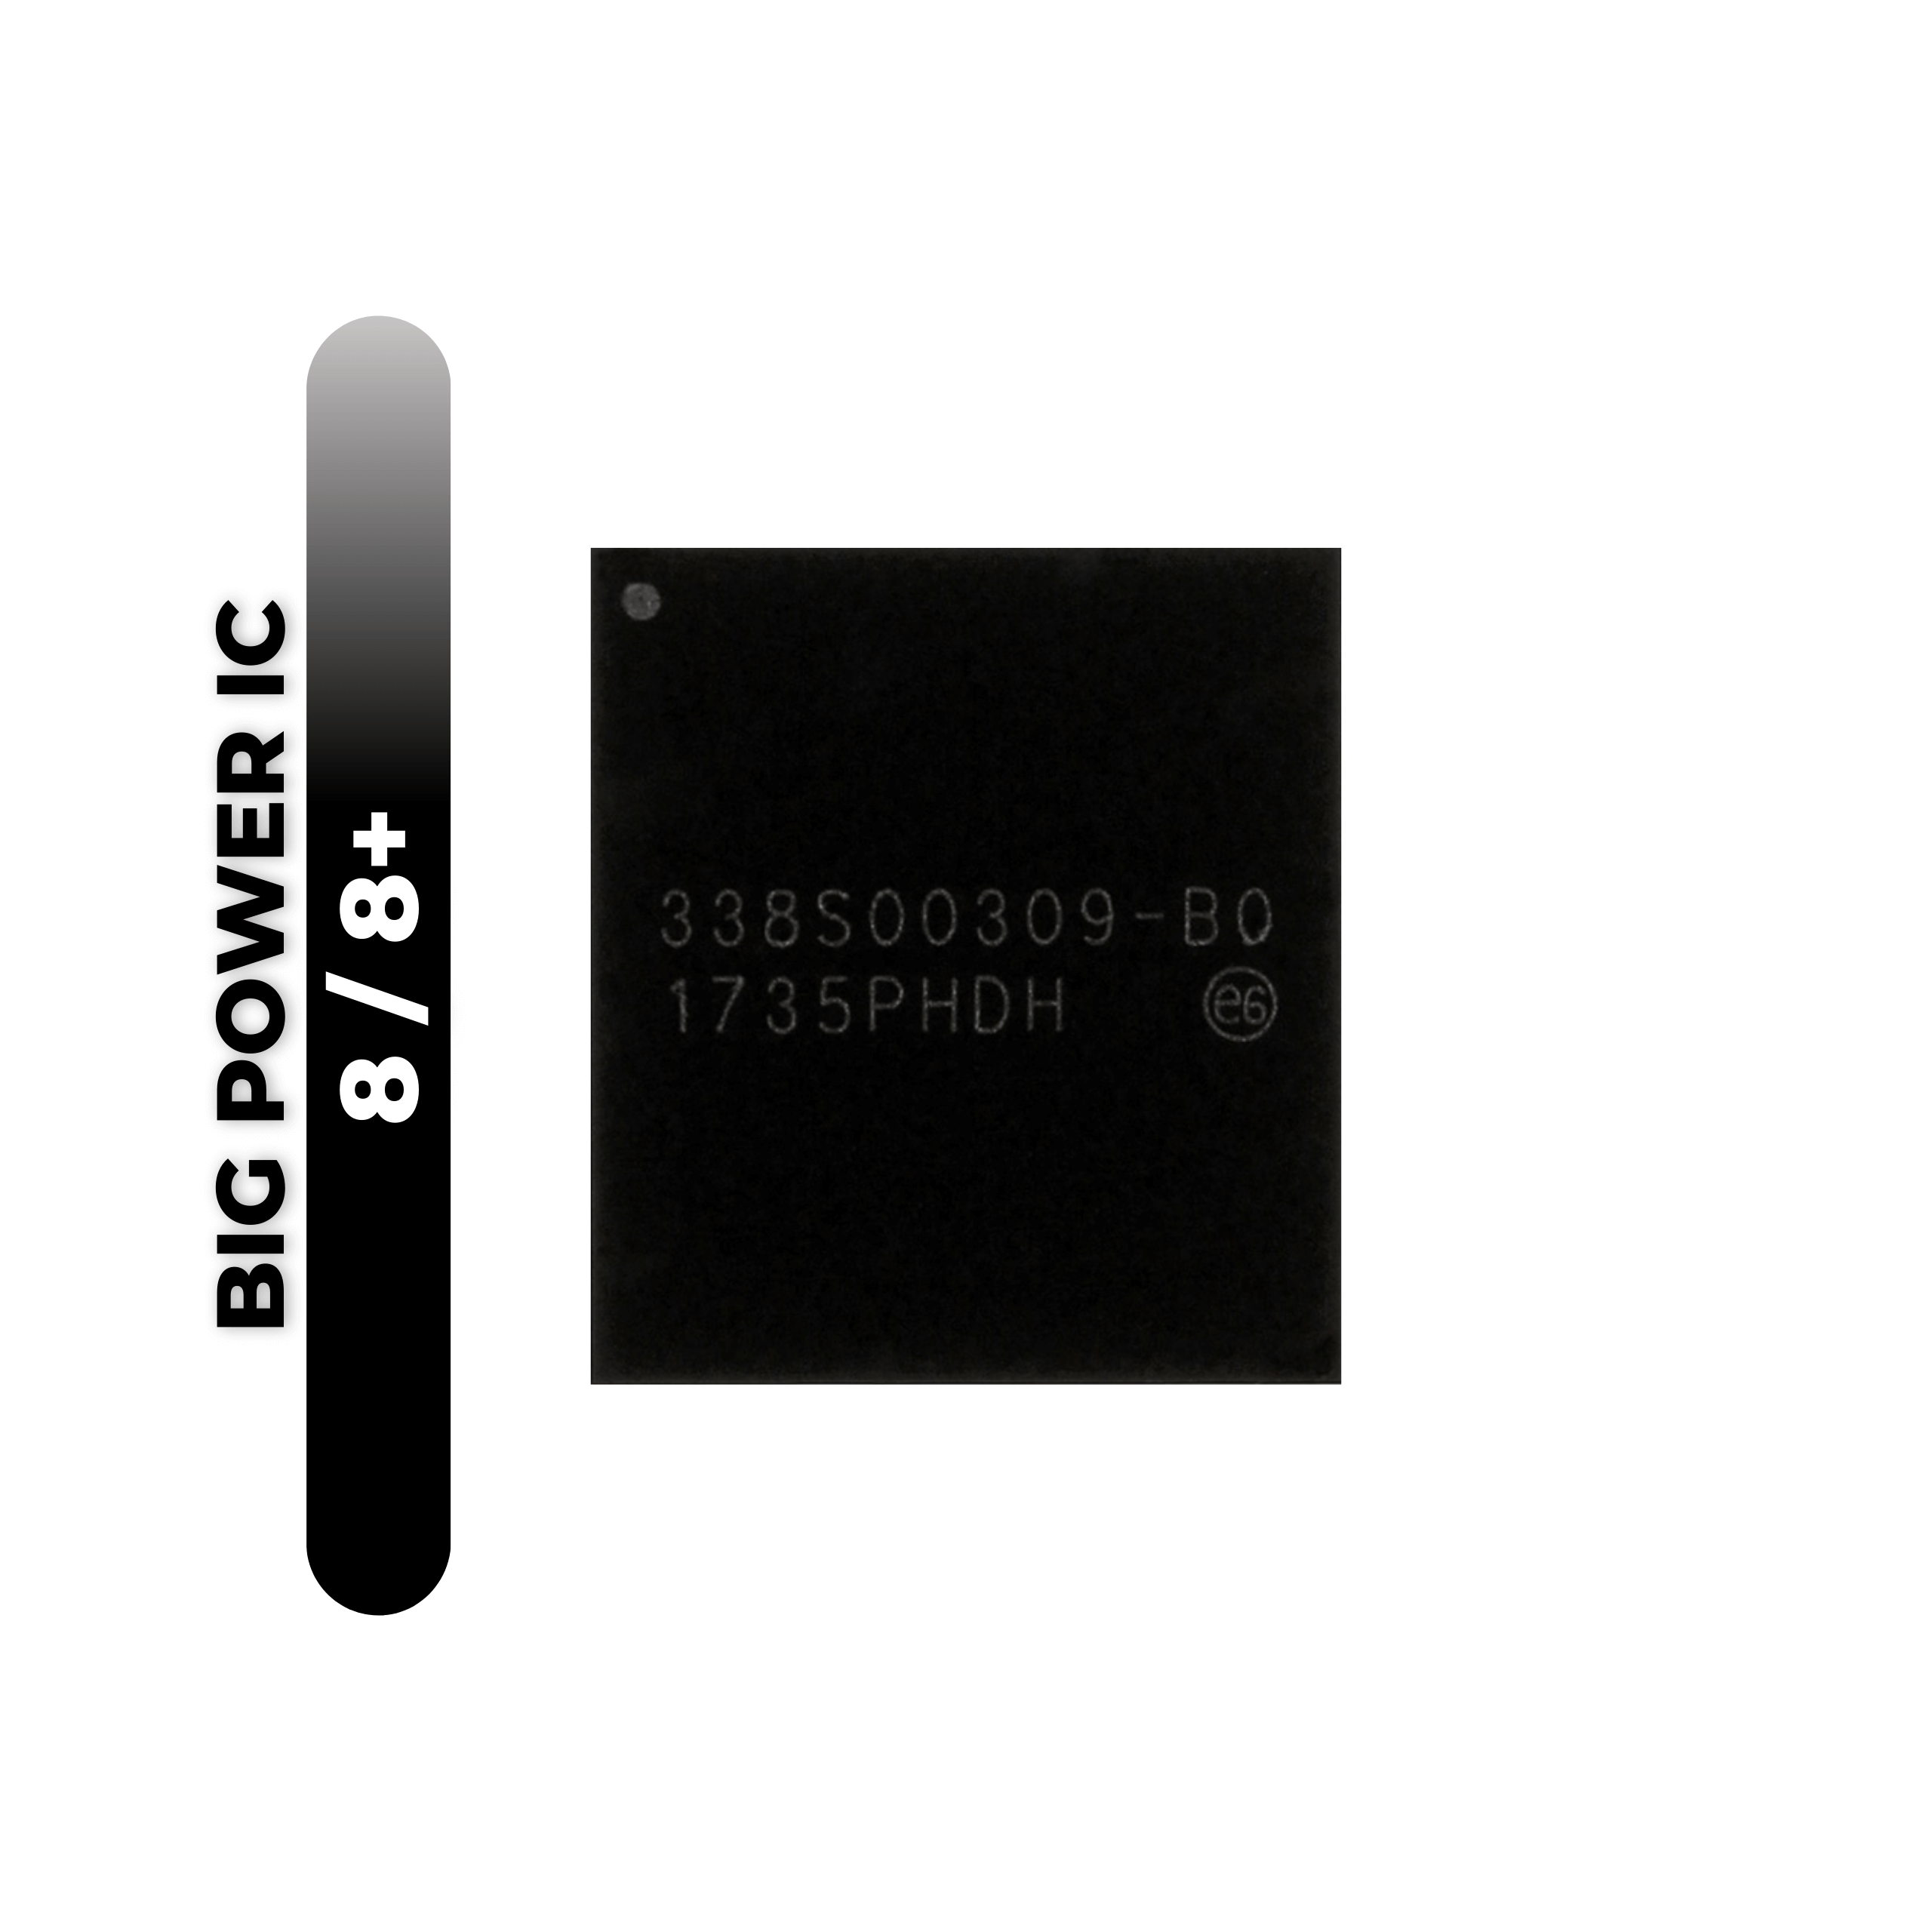 Big Power Management IC for iPhone 8 / iPhone 8 Plus (U2700) (338S00309)